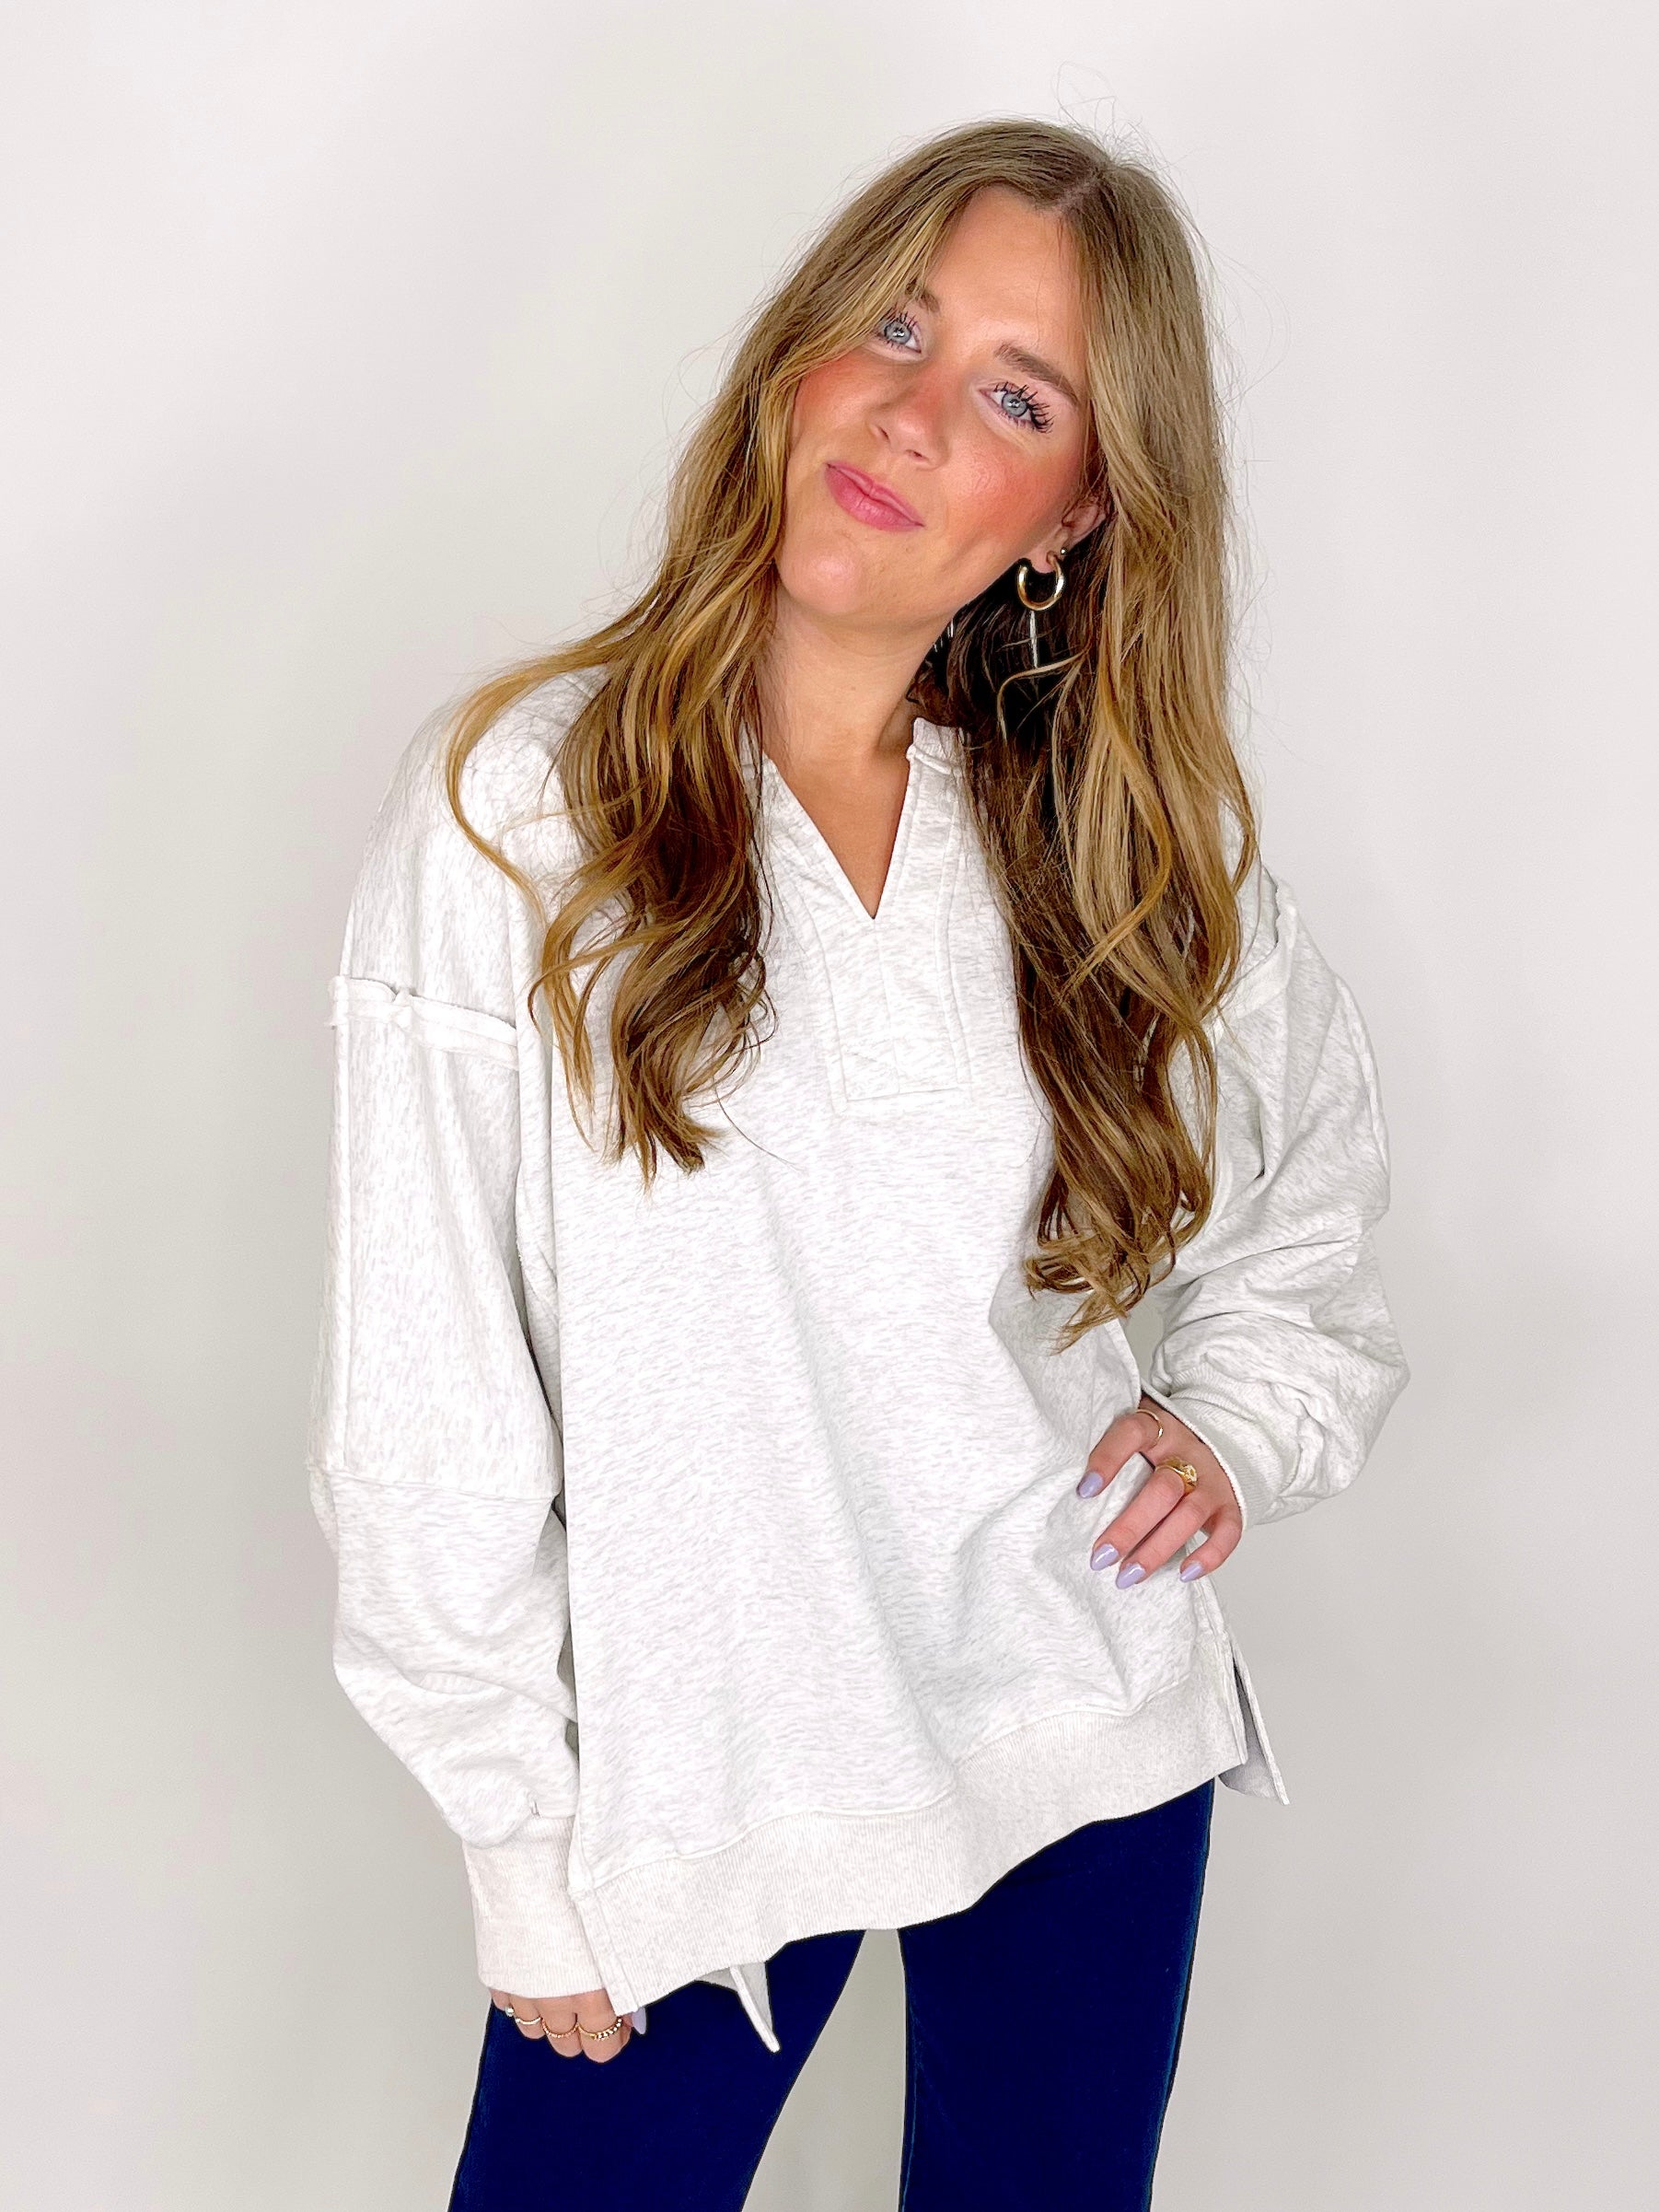 The Reagan Sweatshirt-Sweatshirt-First Love-The Village Shoppe, Women’s Fashion Boutique, Shop Online and In Store - Located in Muscle Shoals, AL.